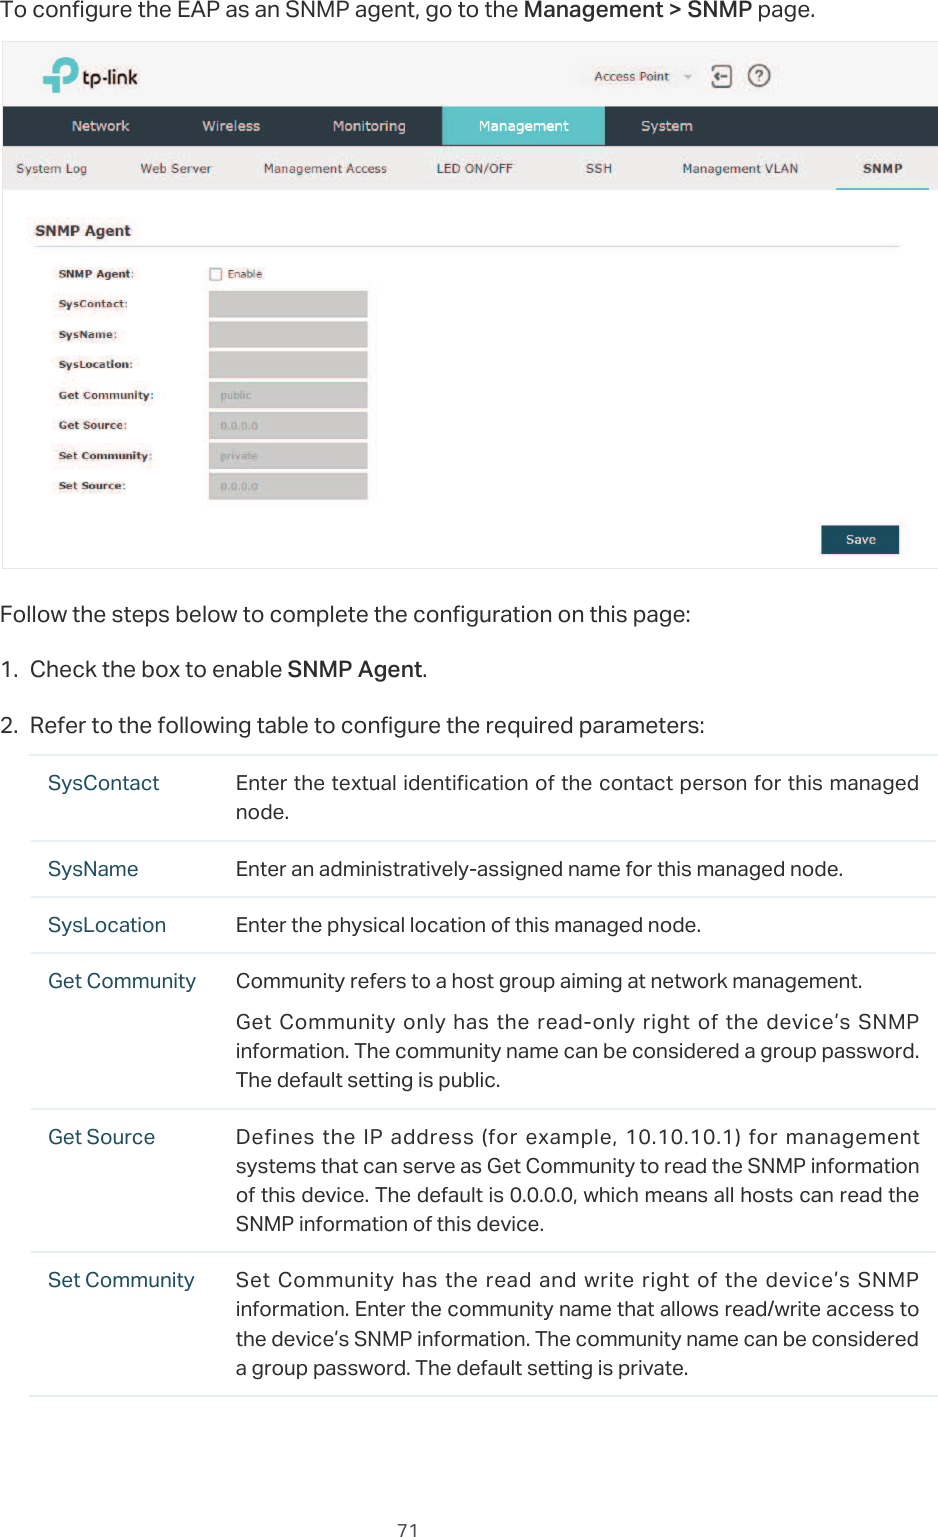  71To configure the EAP as an SNMP agent, go to the 0DQDJHPHQW!6103 page.Follow the steps below to complete the configuration on this page:̝Check the box to enable 6103$JHQW.̝Refer to the following table to configure the required parameters:SysContact Enter the textual identification of the contact person for this managed node.SysName Enter an administratively-assigned name for this managed node.SysLocation Enter the physical location of this managed node.Get Community Community refers to a host group aiming at network management.Get Community  only has the read-only right of the device’s SNMP information. The community name can be considered a group password. The default setting is public.Get Source Defines  the IP  address  (for  example, 10.10.10.1)  for  management systems that can serve as Get Community to read the SNMP information of this device. The default is 0.0.0.0, which means all hosts can read the SNMP information of this device.Set Community Set Community  has the read and  write right of the  device’s  SNMP information. Enter the community name that allows read/write access to the device’s SNMP information. The community name can be considered a group password. The default setting is private.